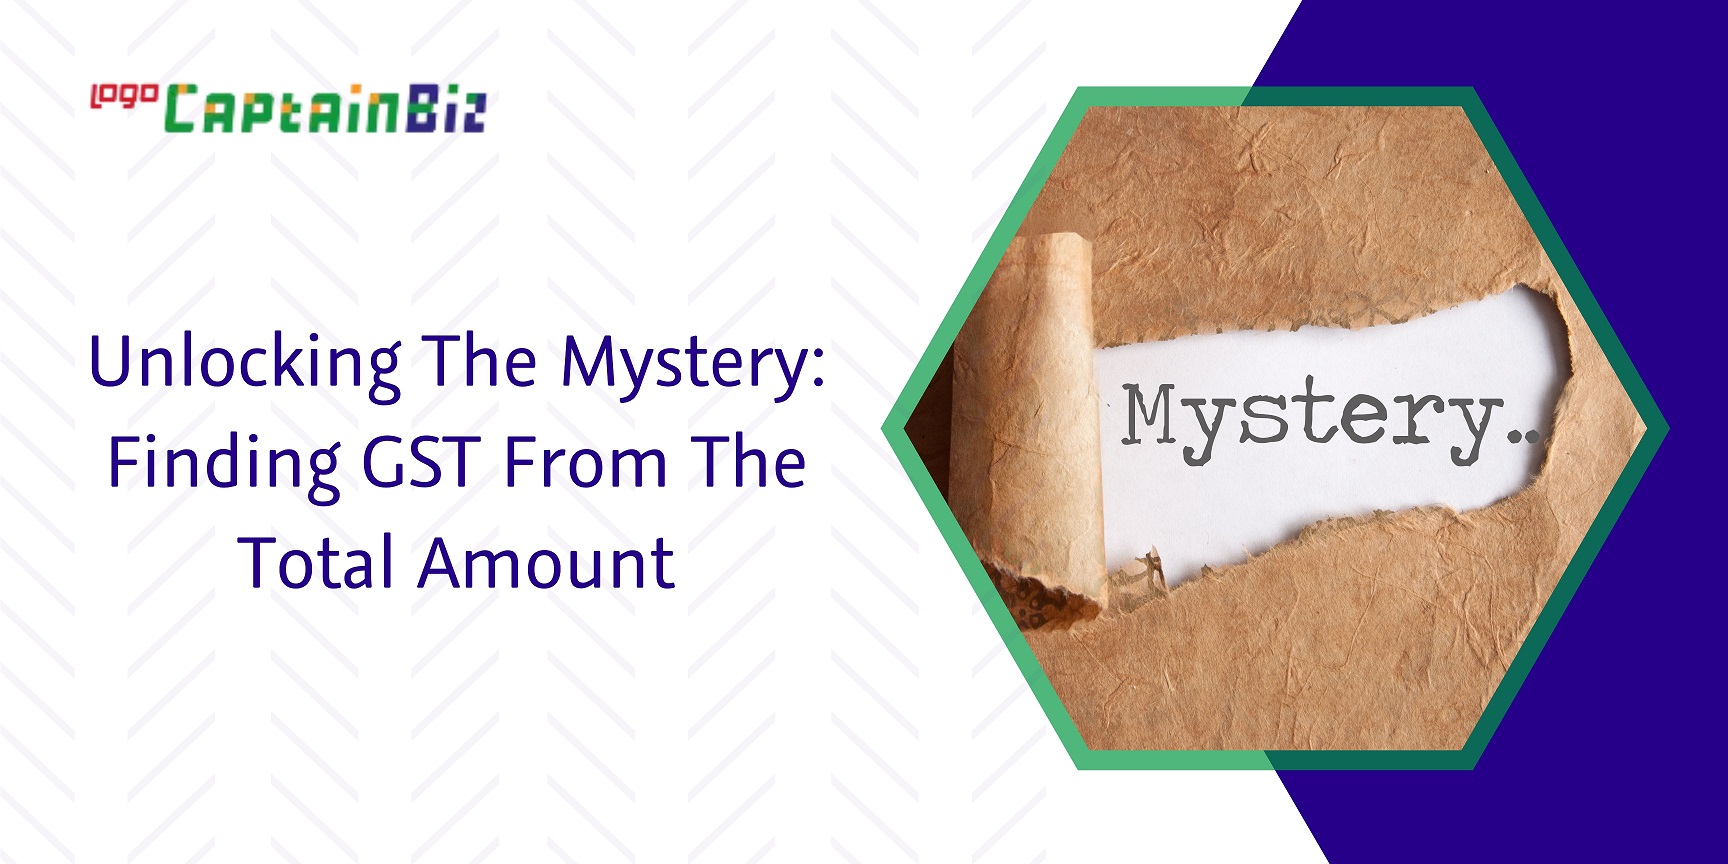 CaptainBiz: unlocking the mystery finding gst from the total amount